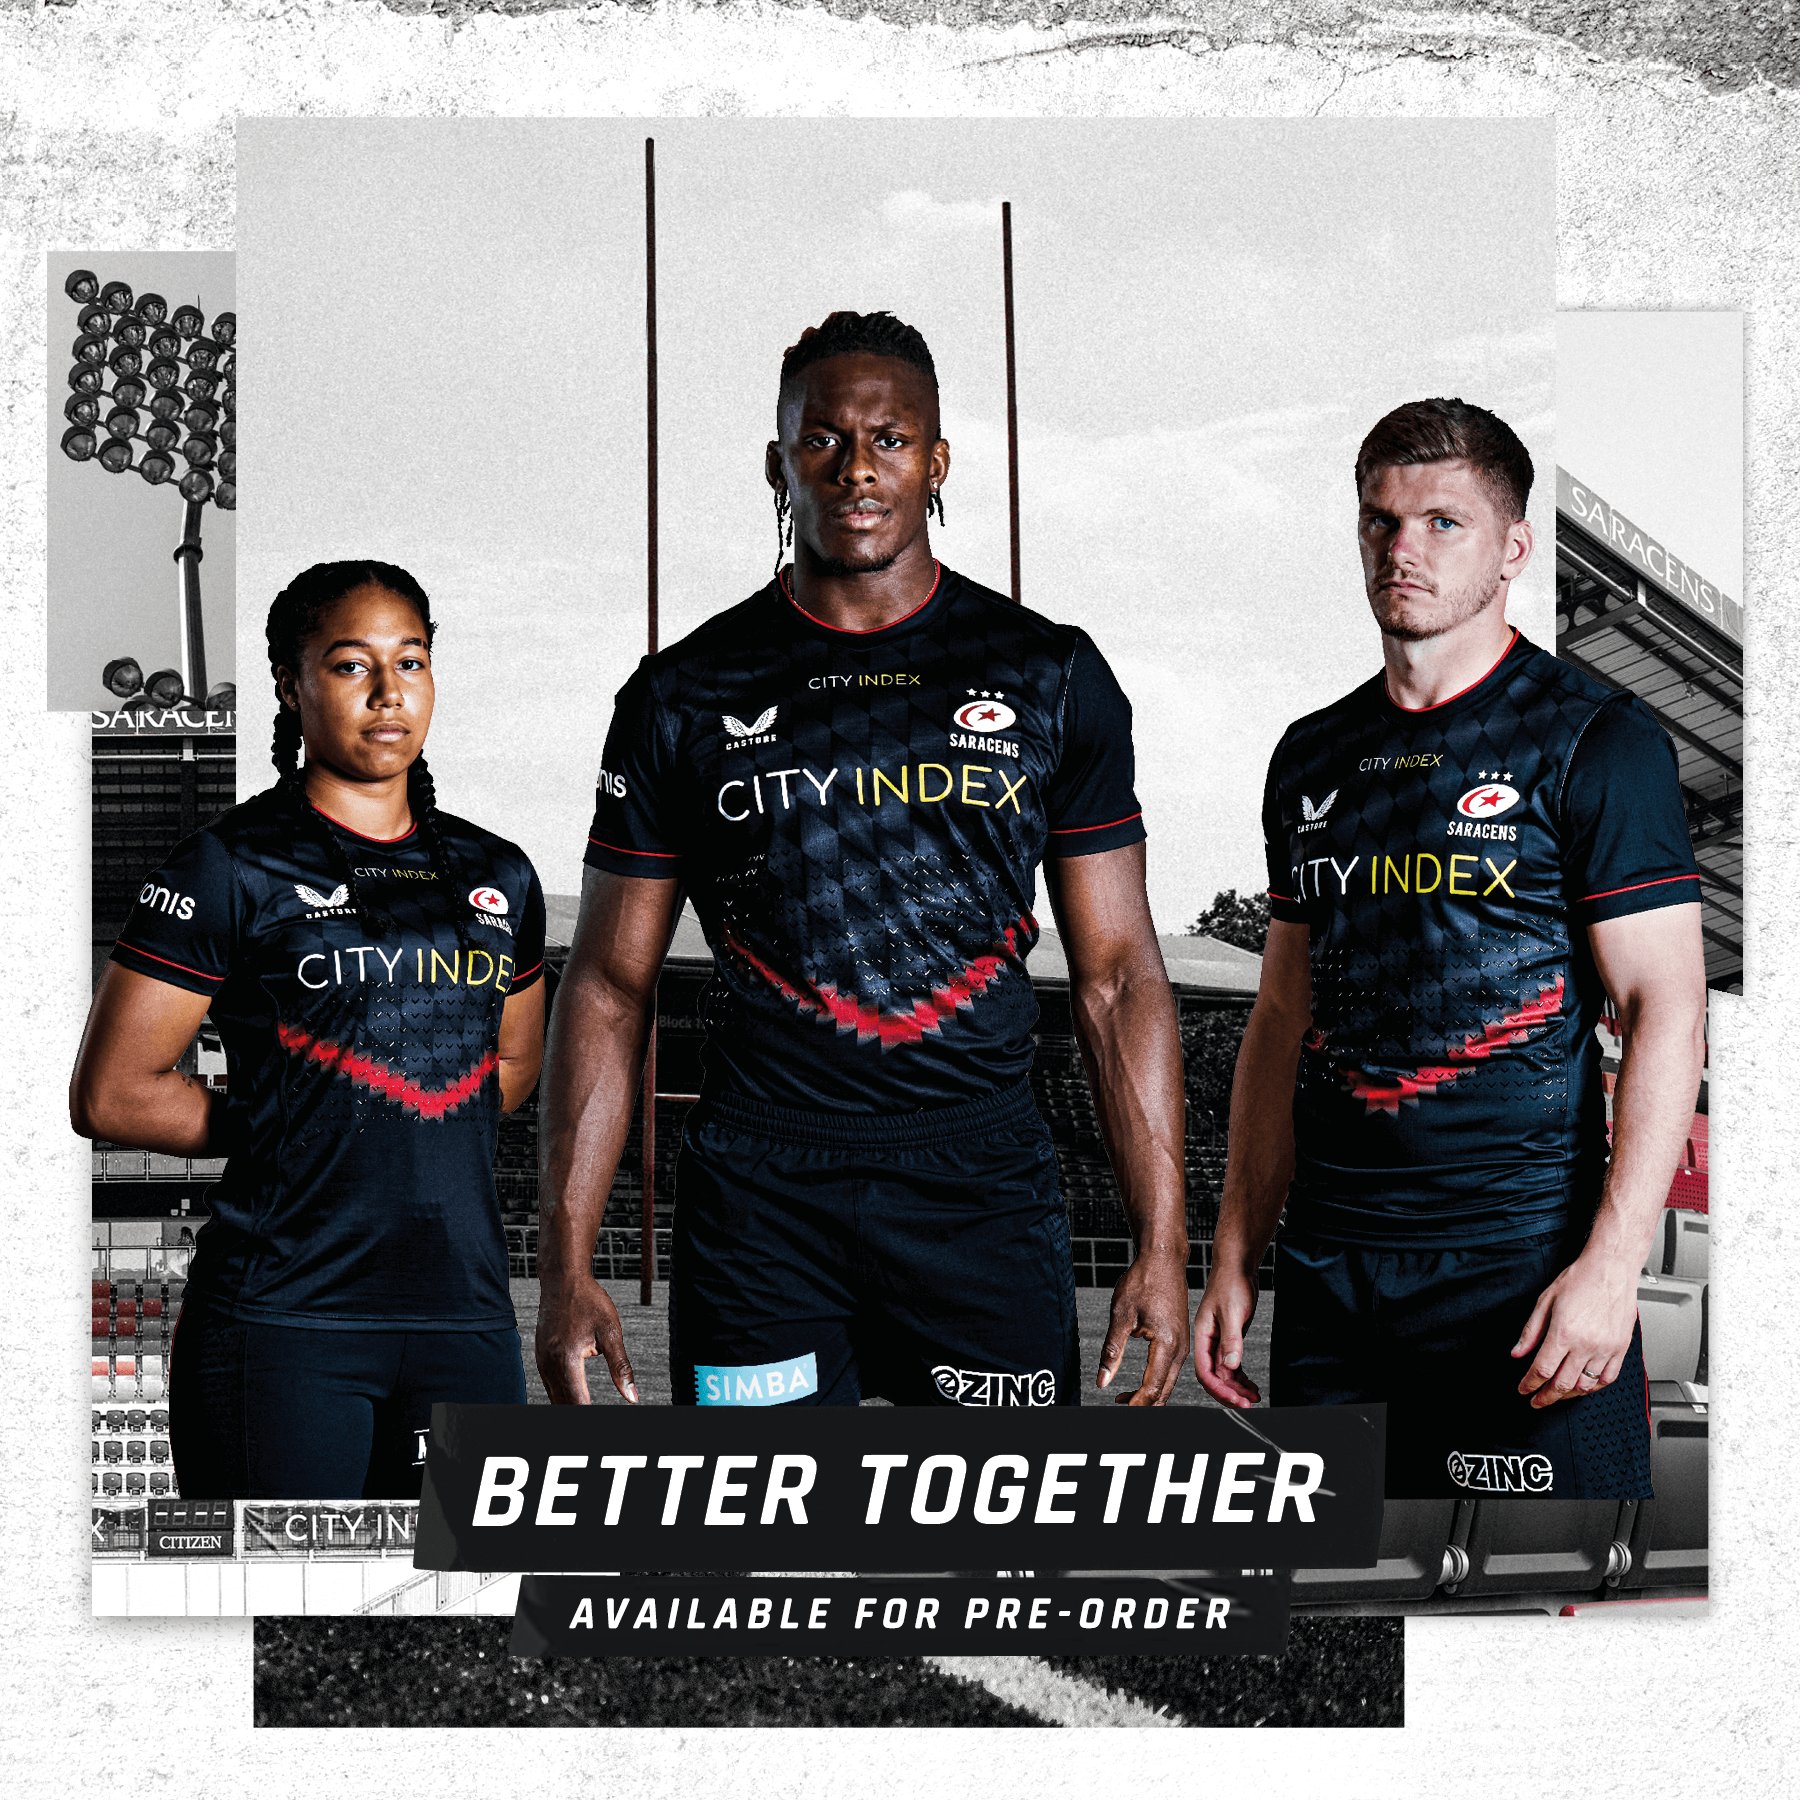 Saracens Rugby Club on X: 𝗕𝗲𝘁𝘁𝗲𝗿 𝗧𝗼𝗴𝗲𝘁𝗵𝗲𝗿. 𝗢𝘂𝗿  𝟮𝟬𝟮𝟭/𝟮𝟮 𝗖𝗮𝘀𝘁𝗼𝗿𝗲 𝗵𝗼𝗺𝗲 𝗸𝗶𝘁. 𝗔𝘃𝗮𝗶𝗹𝗮𝗯𝗹𝗲 𝗳𝗼𝗿  𝗽𝗿𝗲-𝗼𝗿𝗱𝗲𝗿 𝗻𝗼𝘄. 🛒  #BetterNeverStops   / X